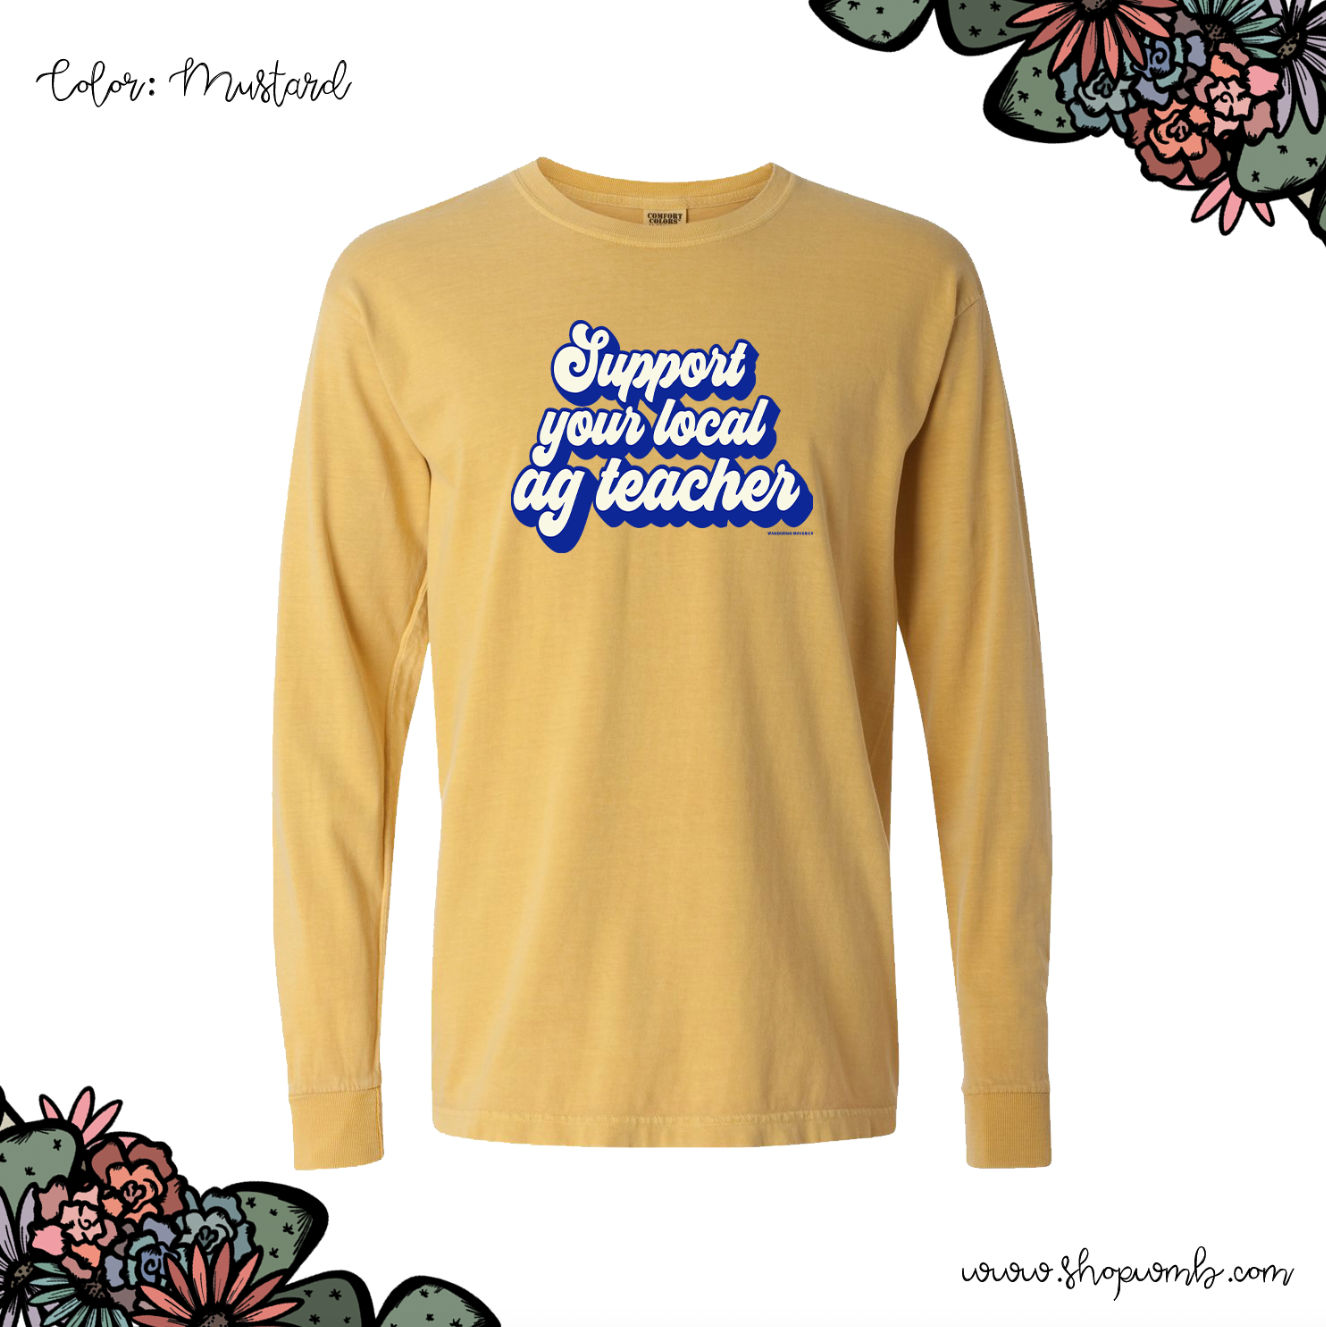 Retro Support Your Local Ag Teacher Blue & White LONG SLEEVE T-Shirt (S-3XL) - Multiple Colors!